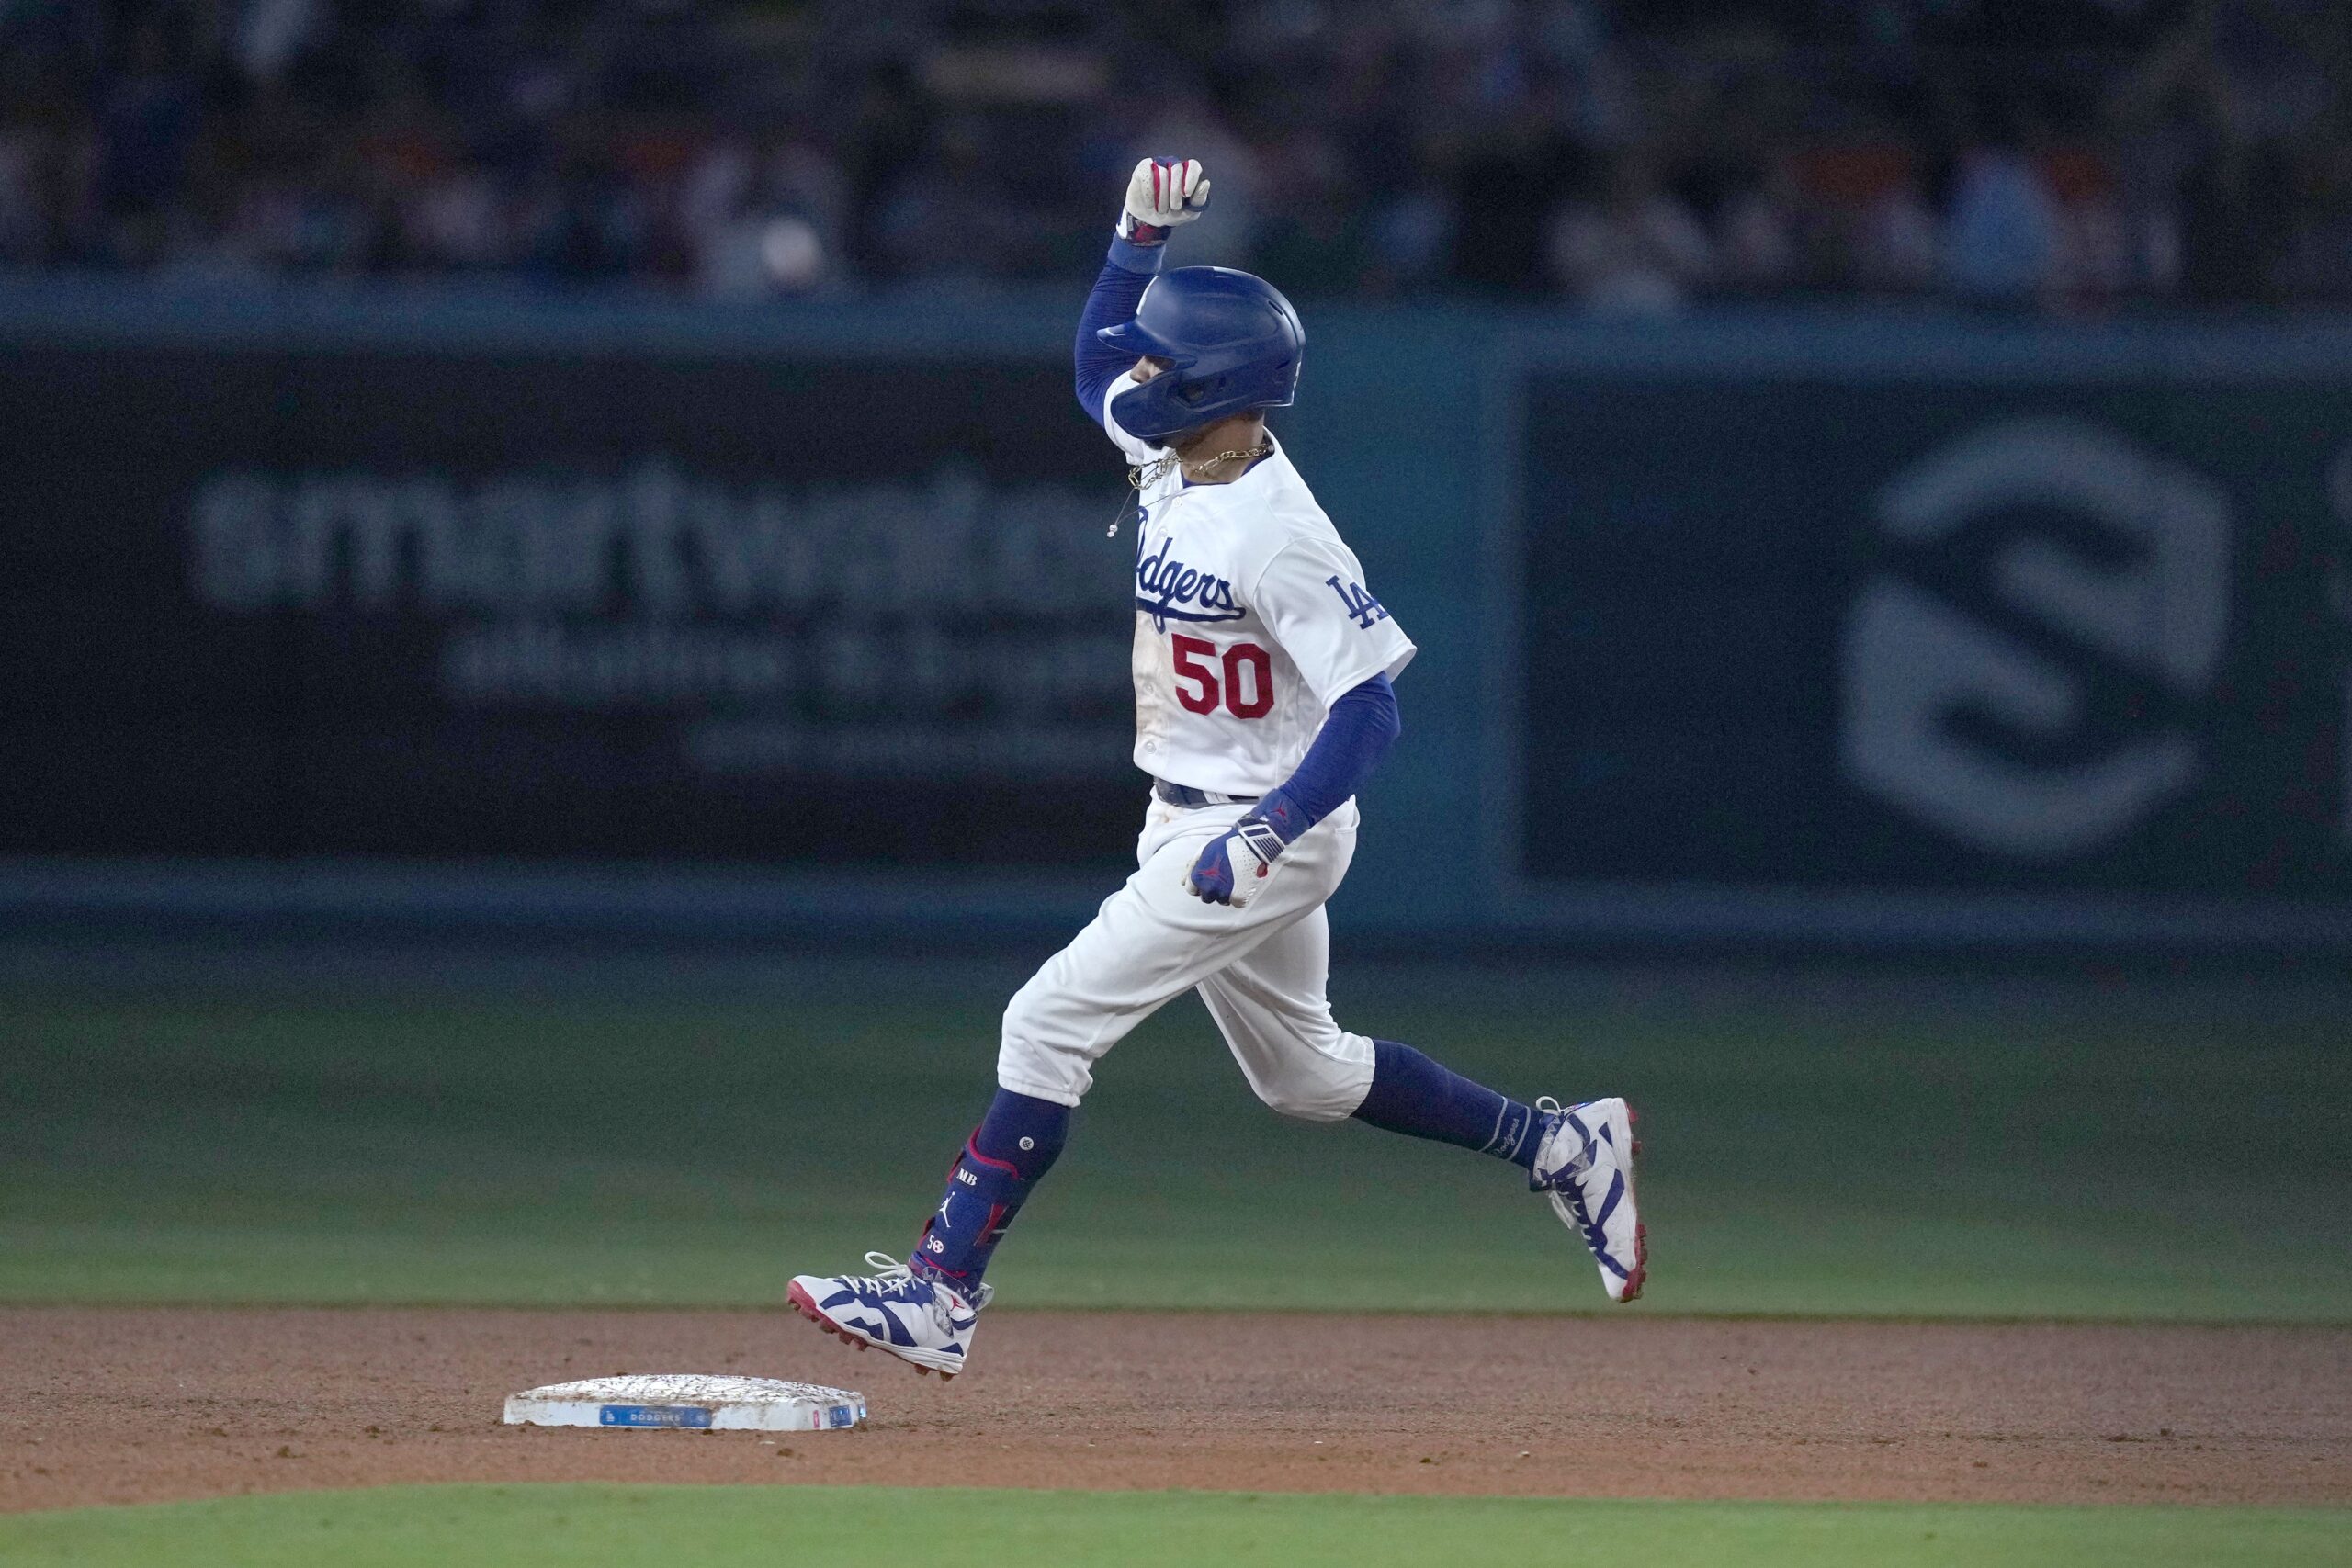 Dodgers Nation Milestone Giveaway: Win an Authentic Mookie Betts